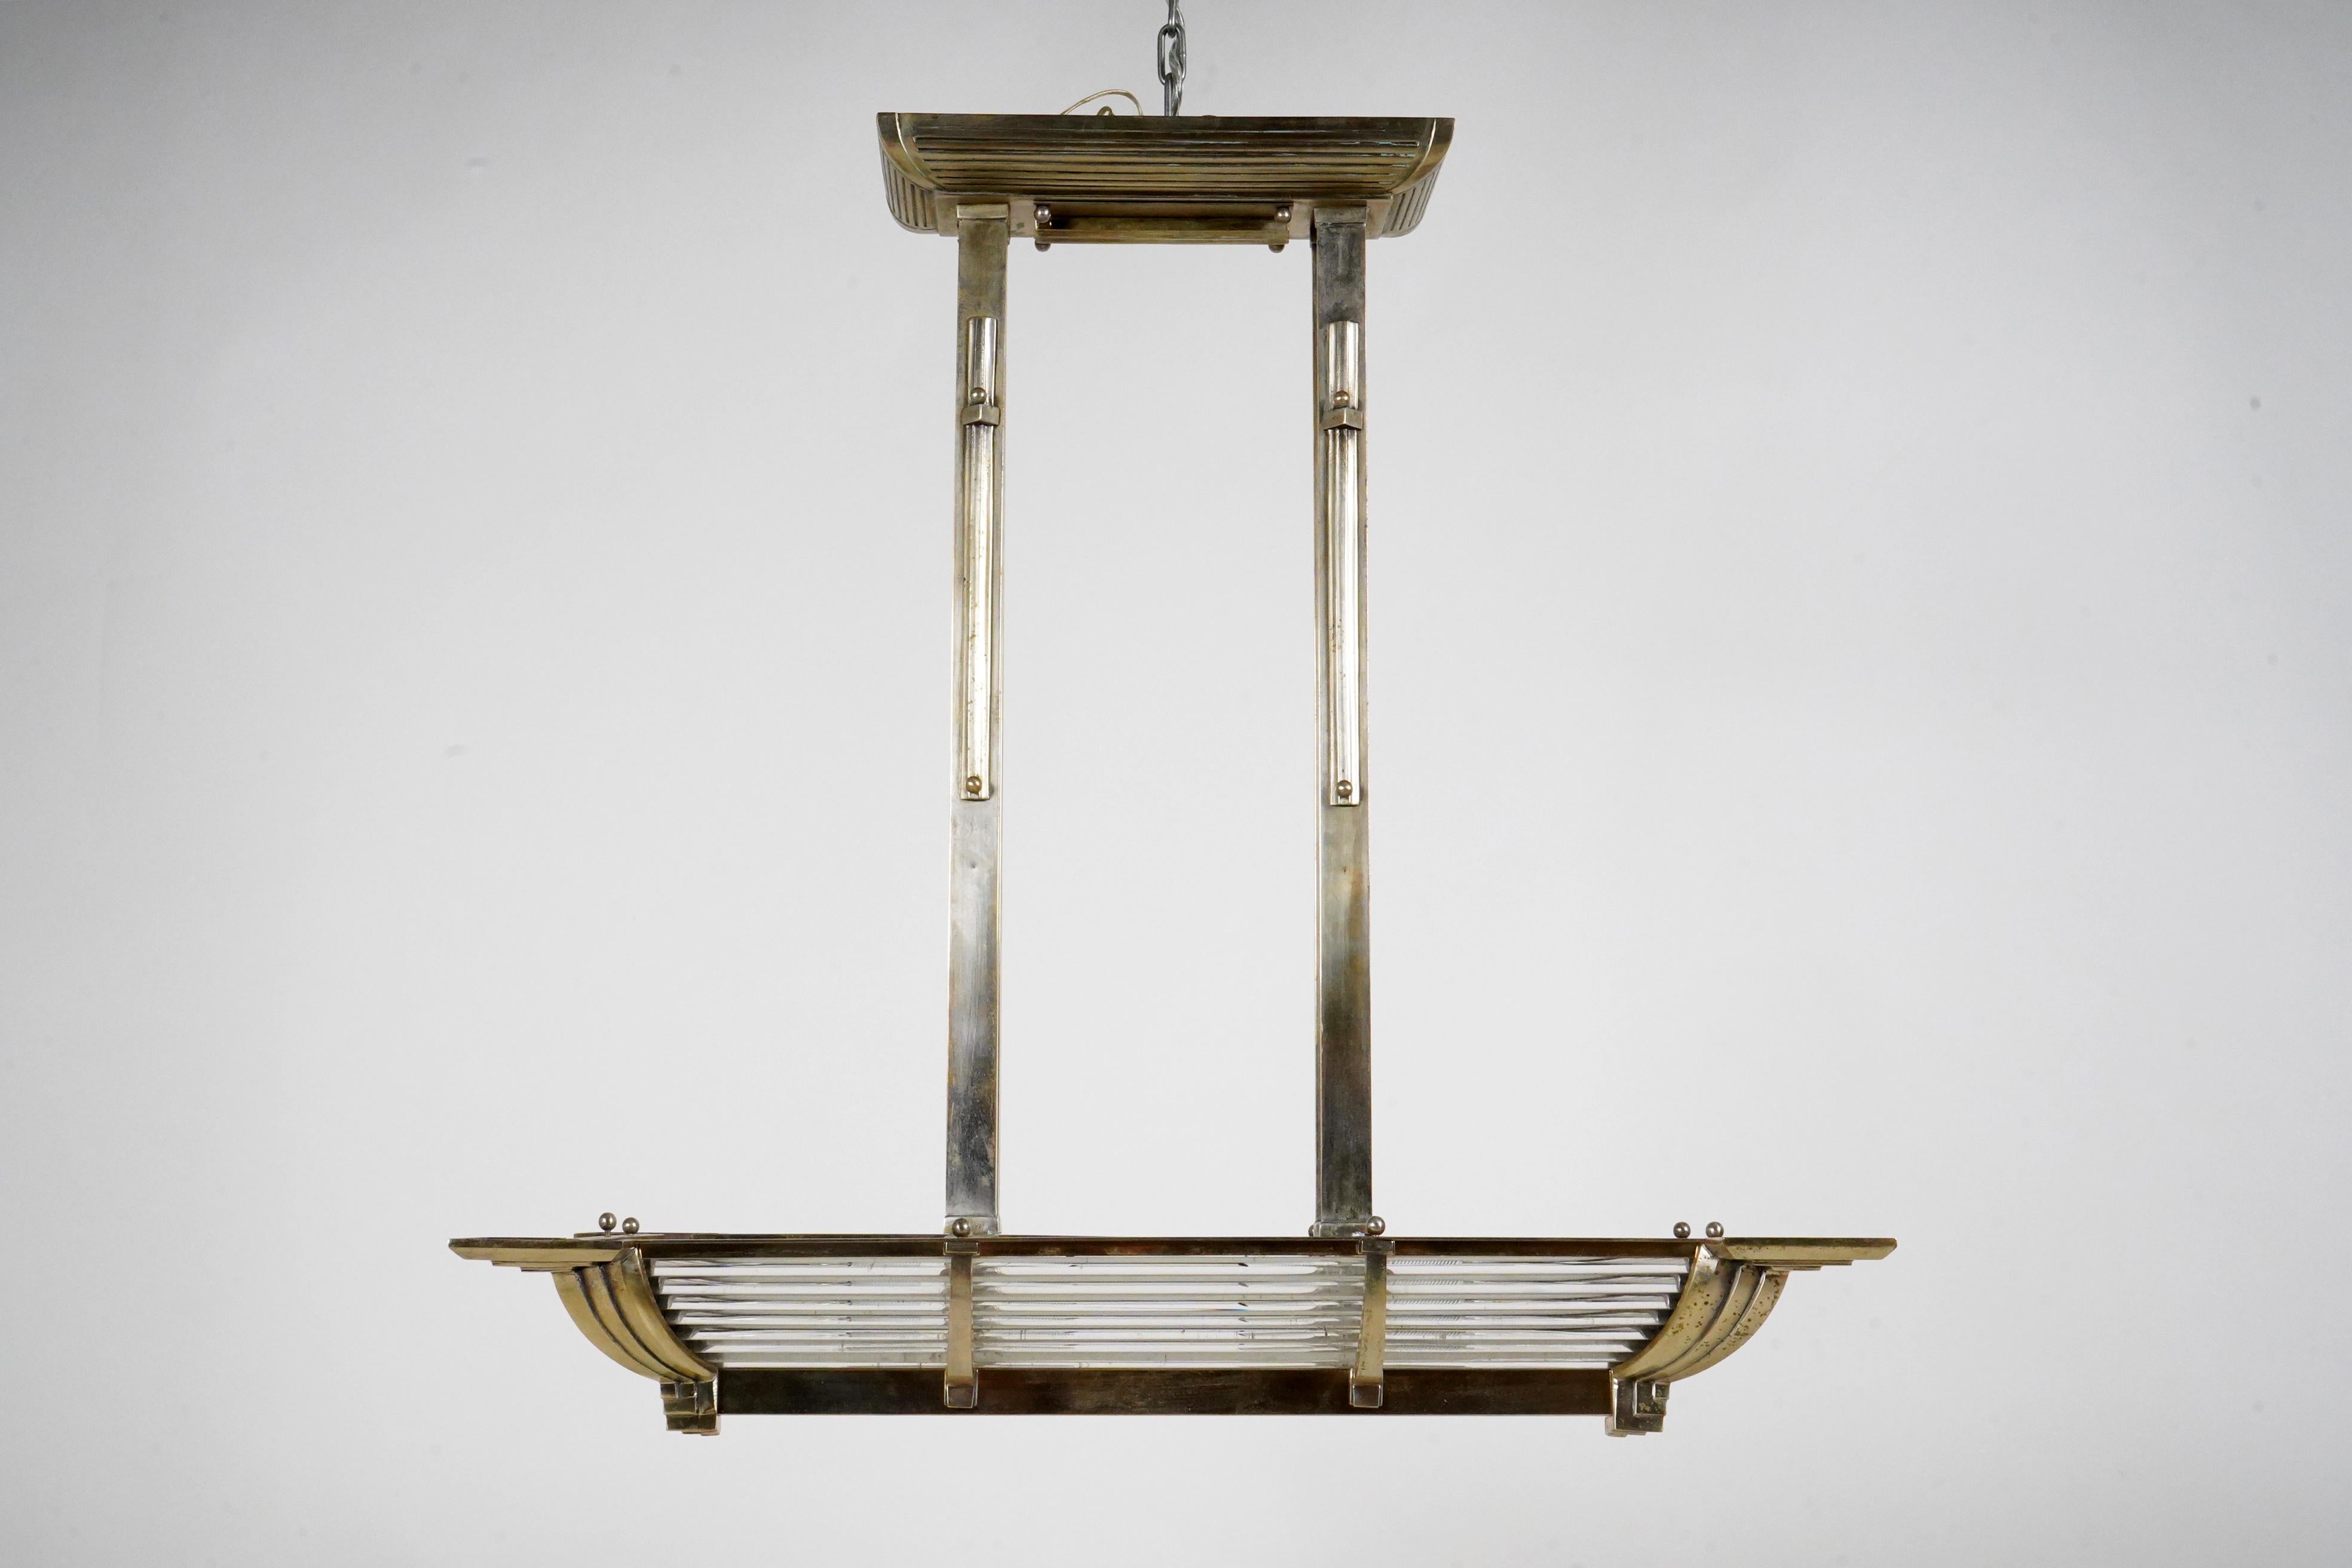 A French Art Deco “Billiard” Style Nickel Chandelier With Curved Sides 1